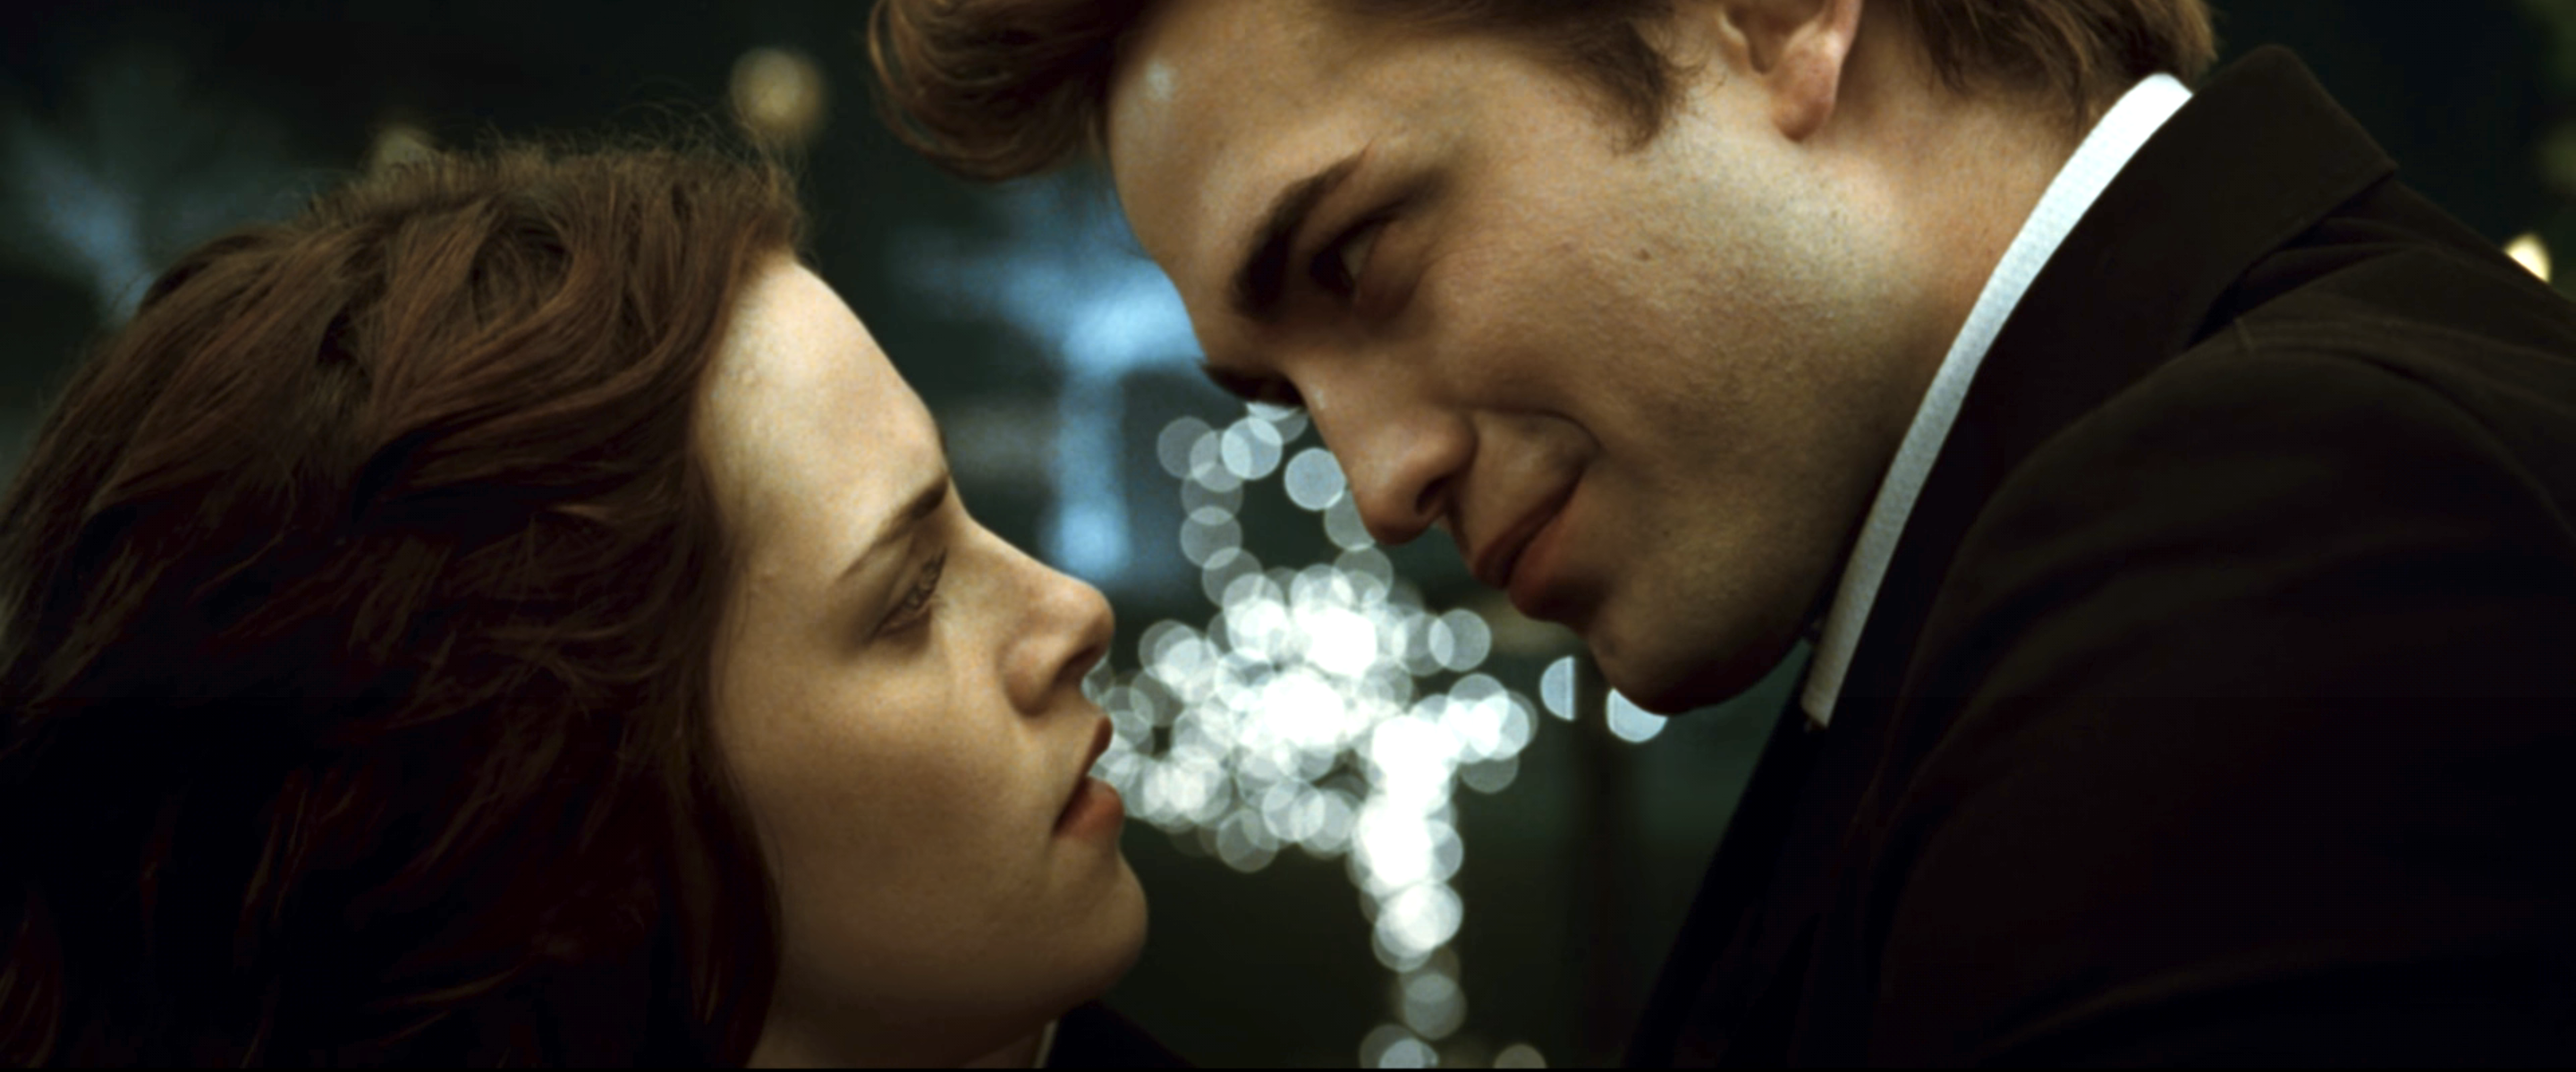 Bella and Edward in an embrace